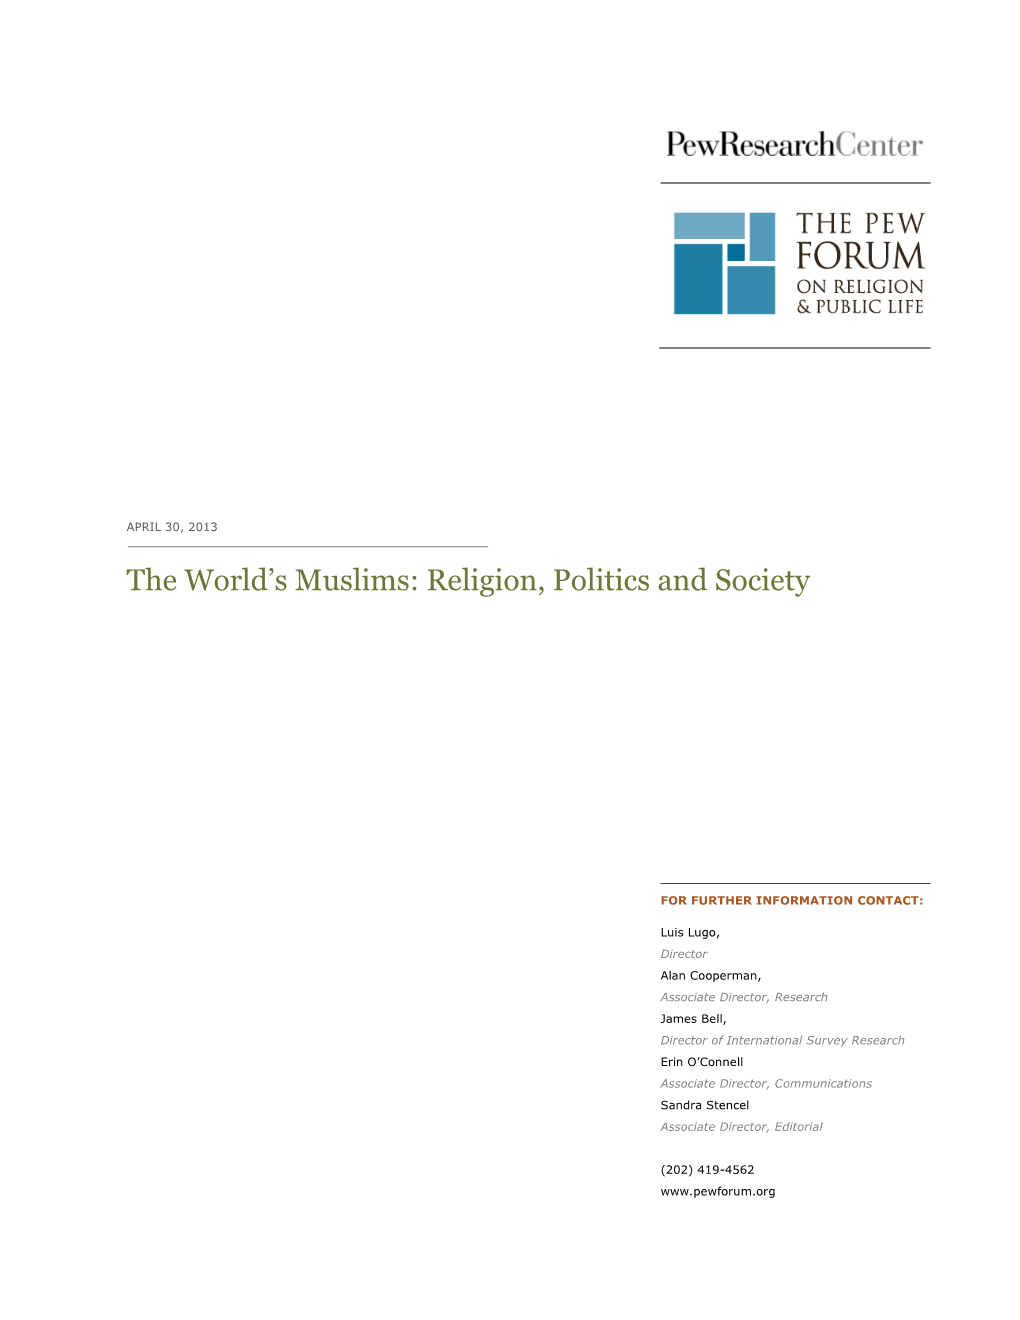 The World's Muslims: Religion, Politics and Society Survey Topline Results